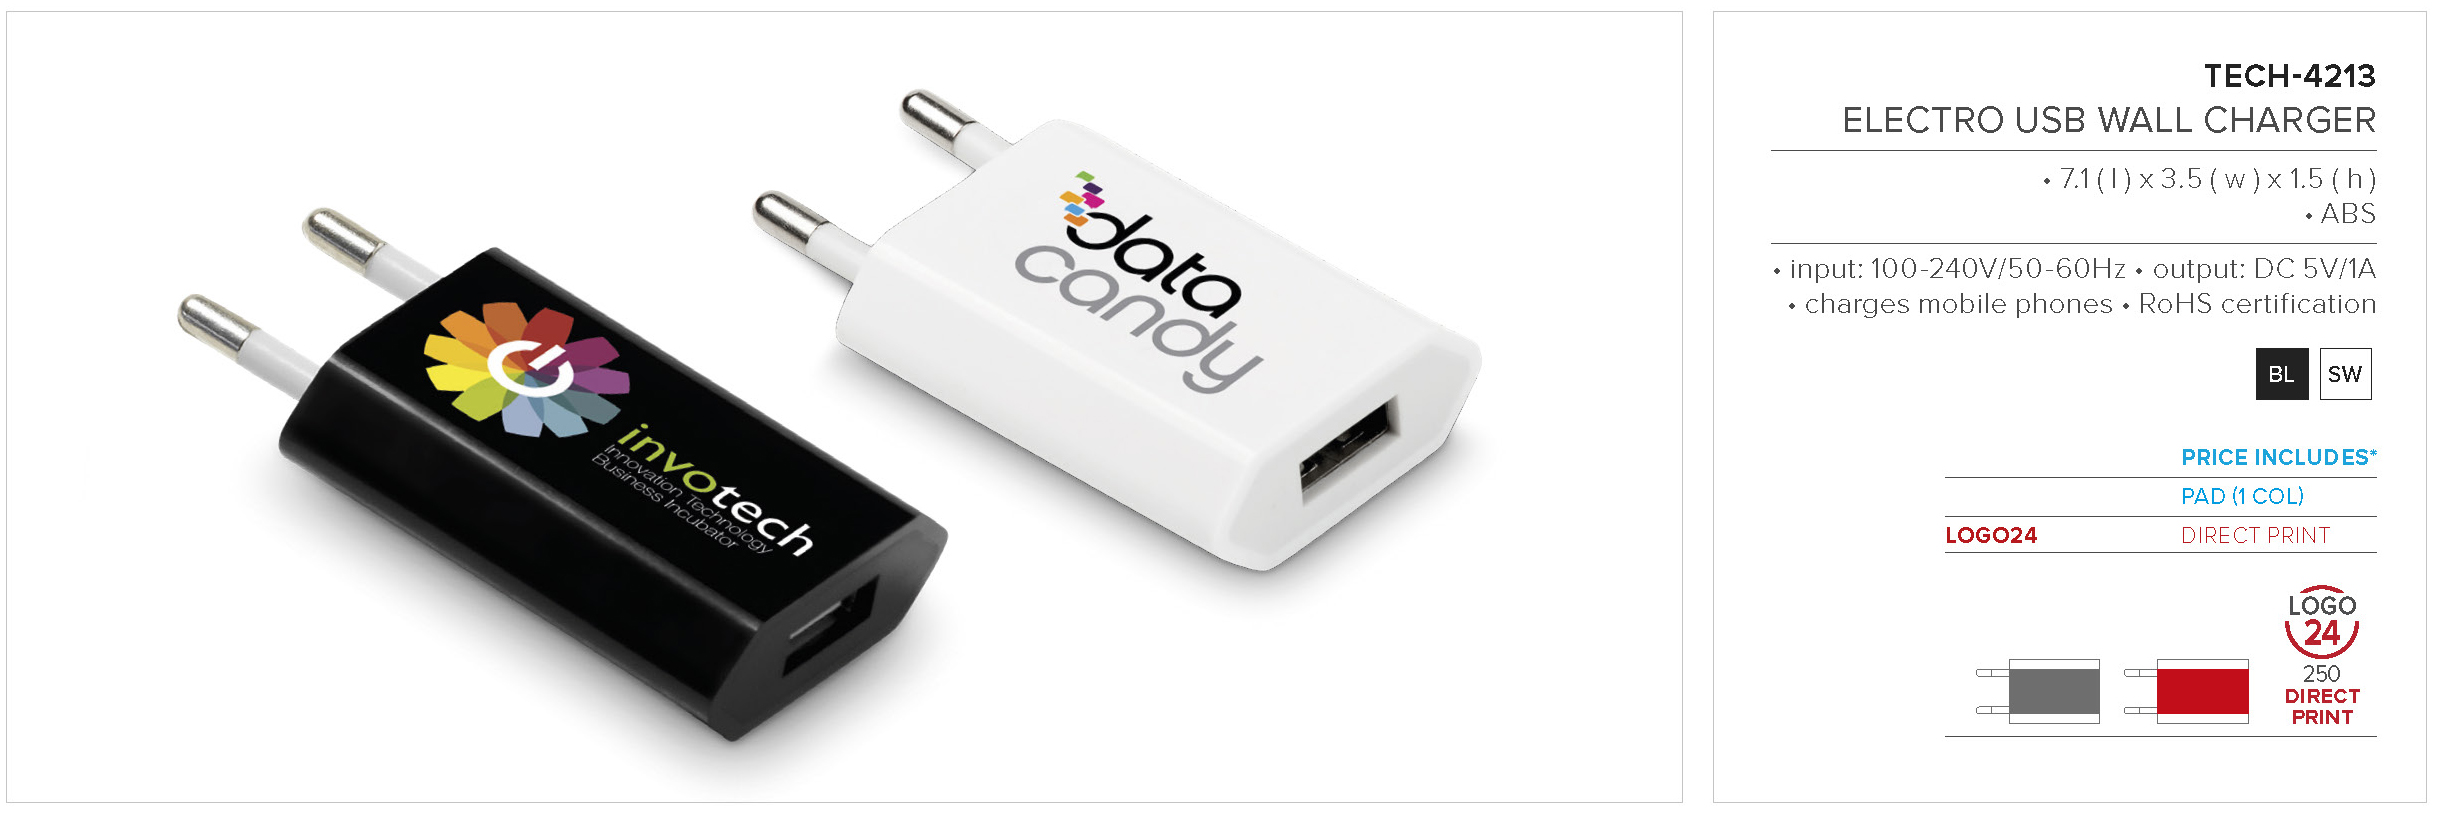 TECH-4213 - Electro USB Wall Charger - Catalogue Image